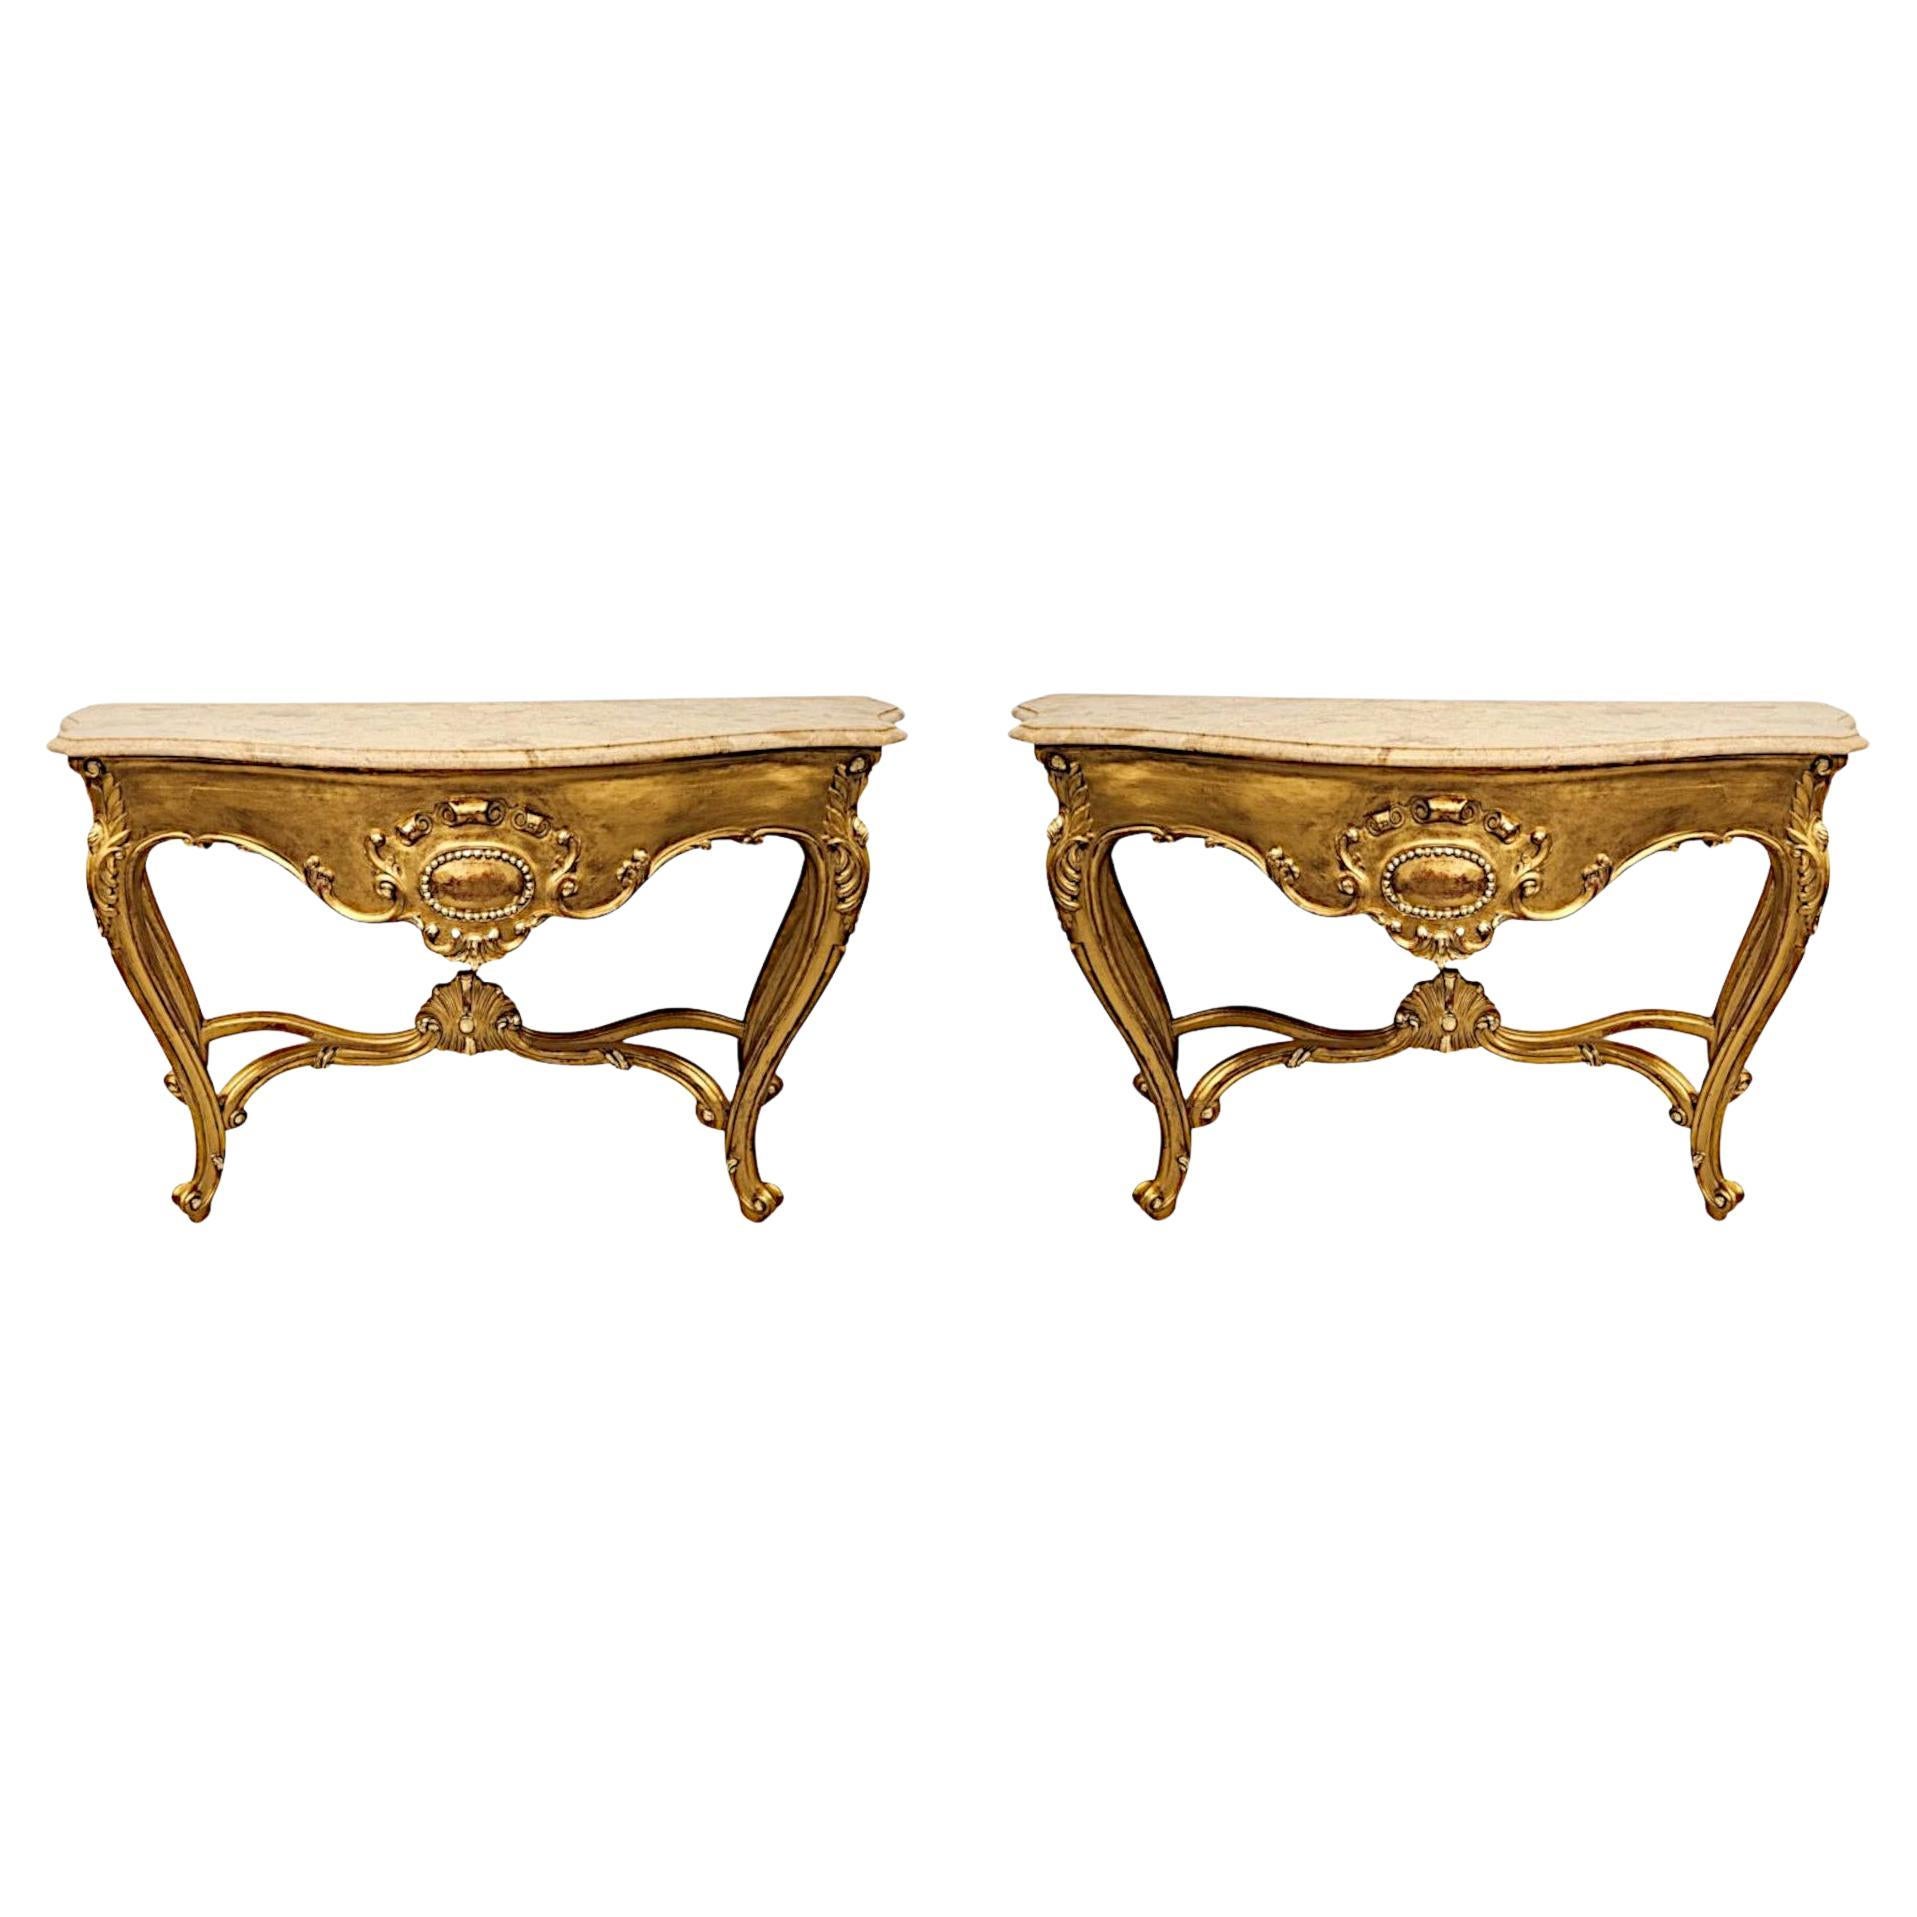 A Very Fine Pair of Early 20th Century Marble Top Giltwood Console Tables  For Sale